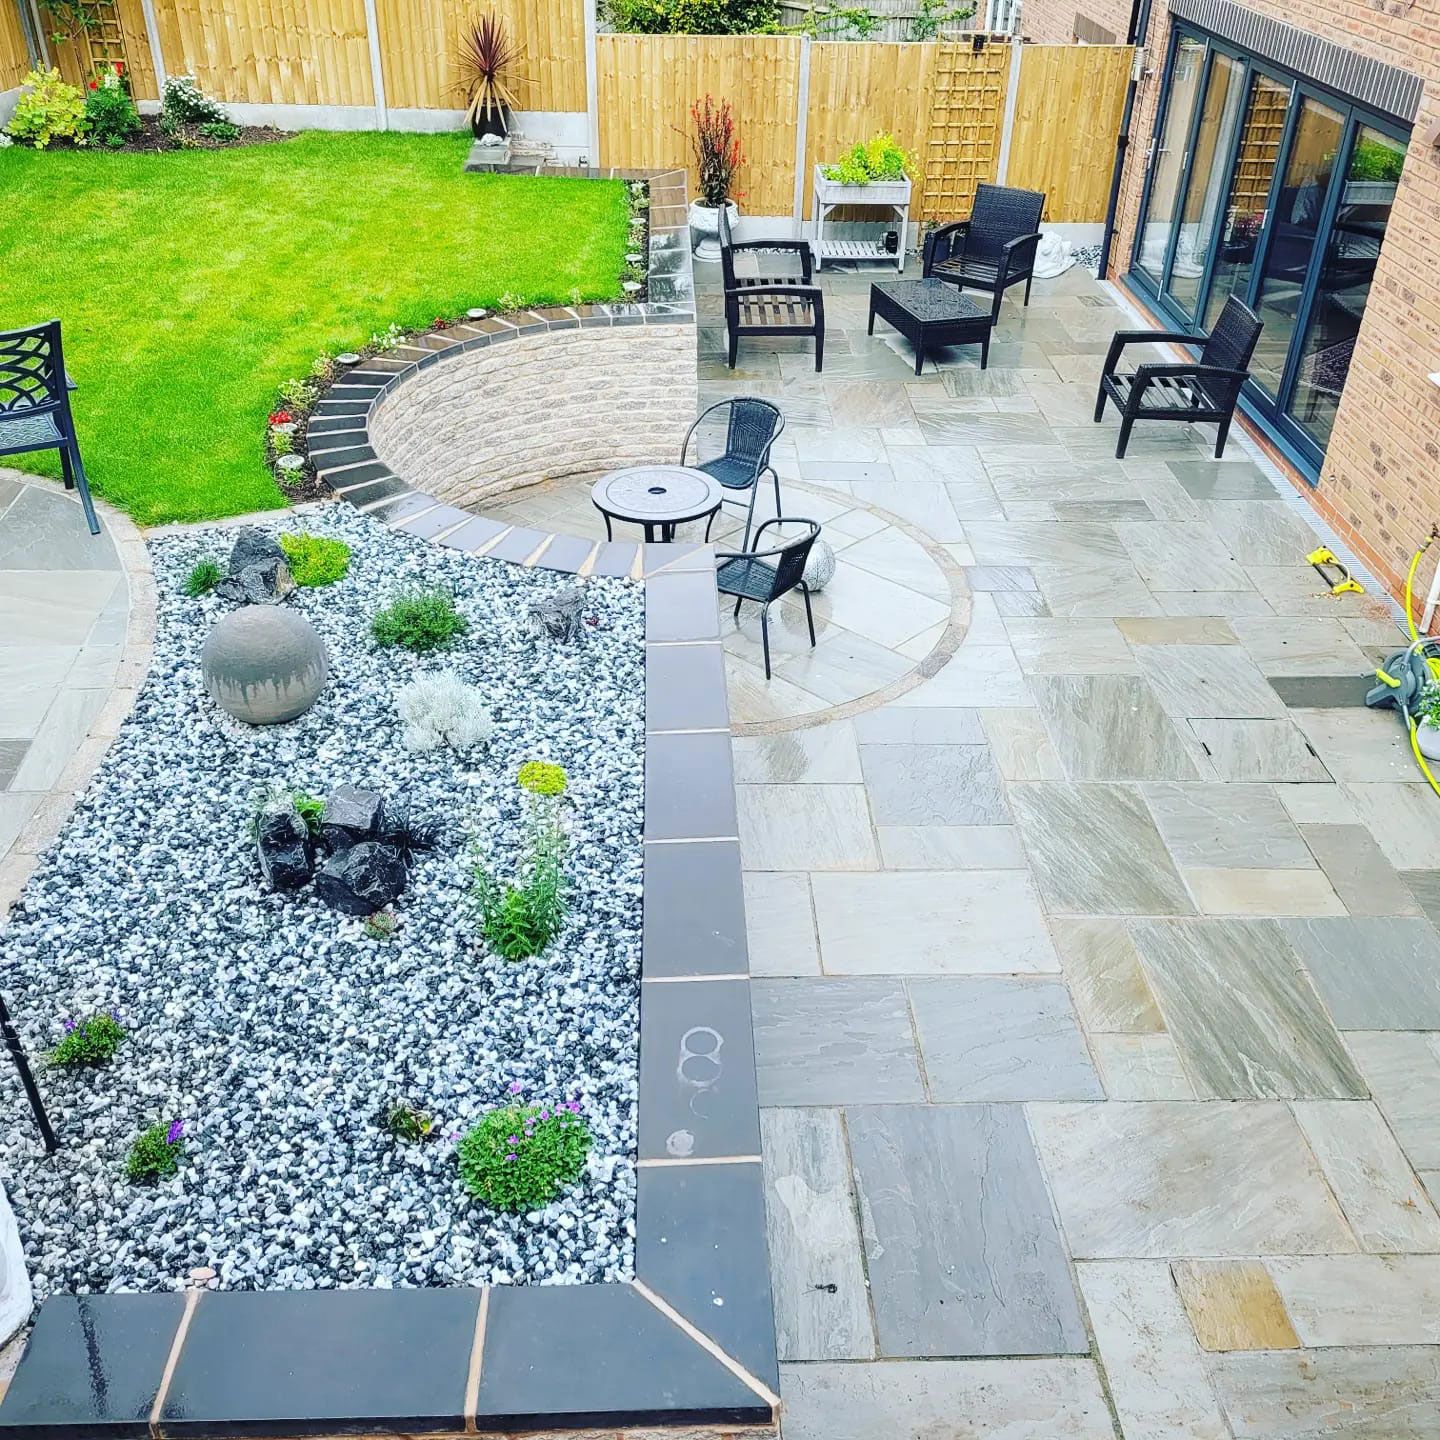 DNA Landscapes Balsall Common Indian stone patio